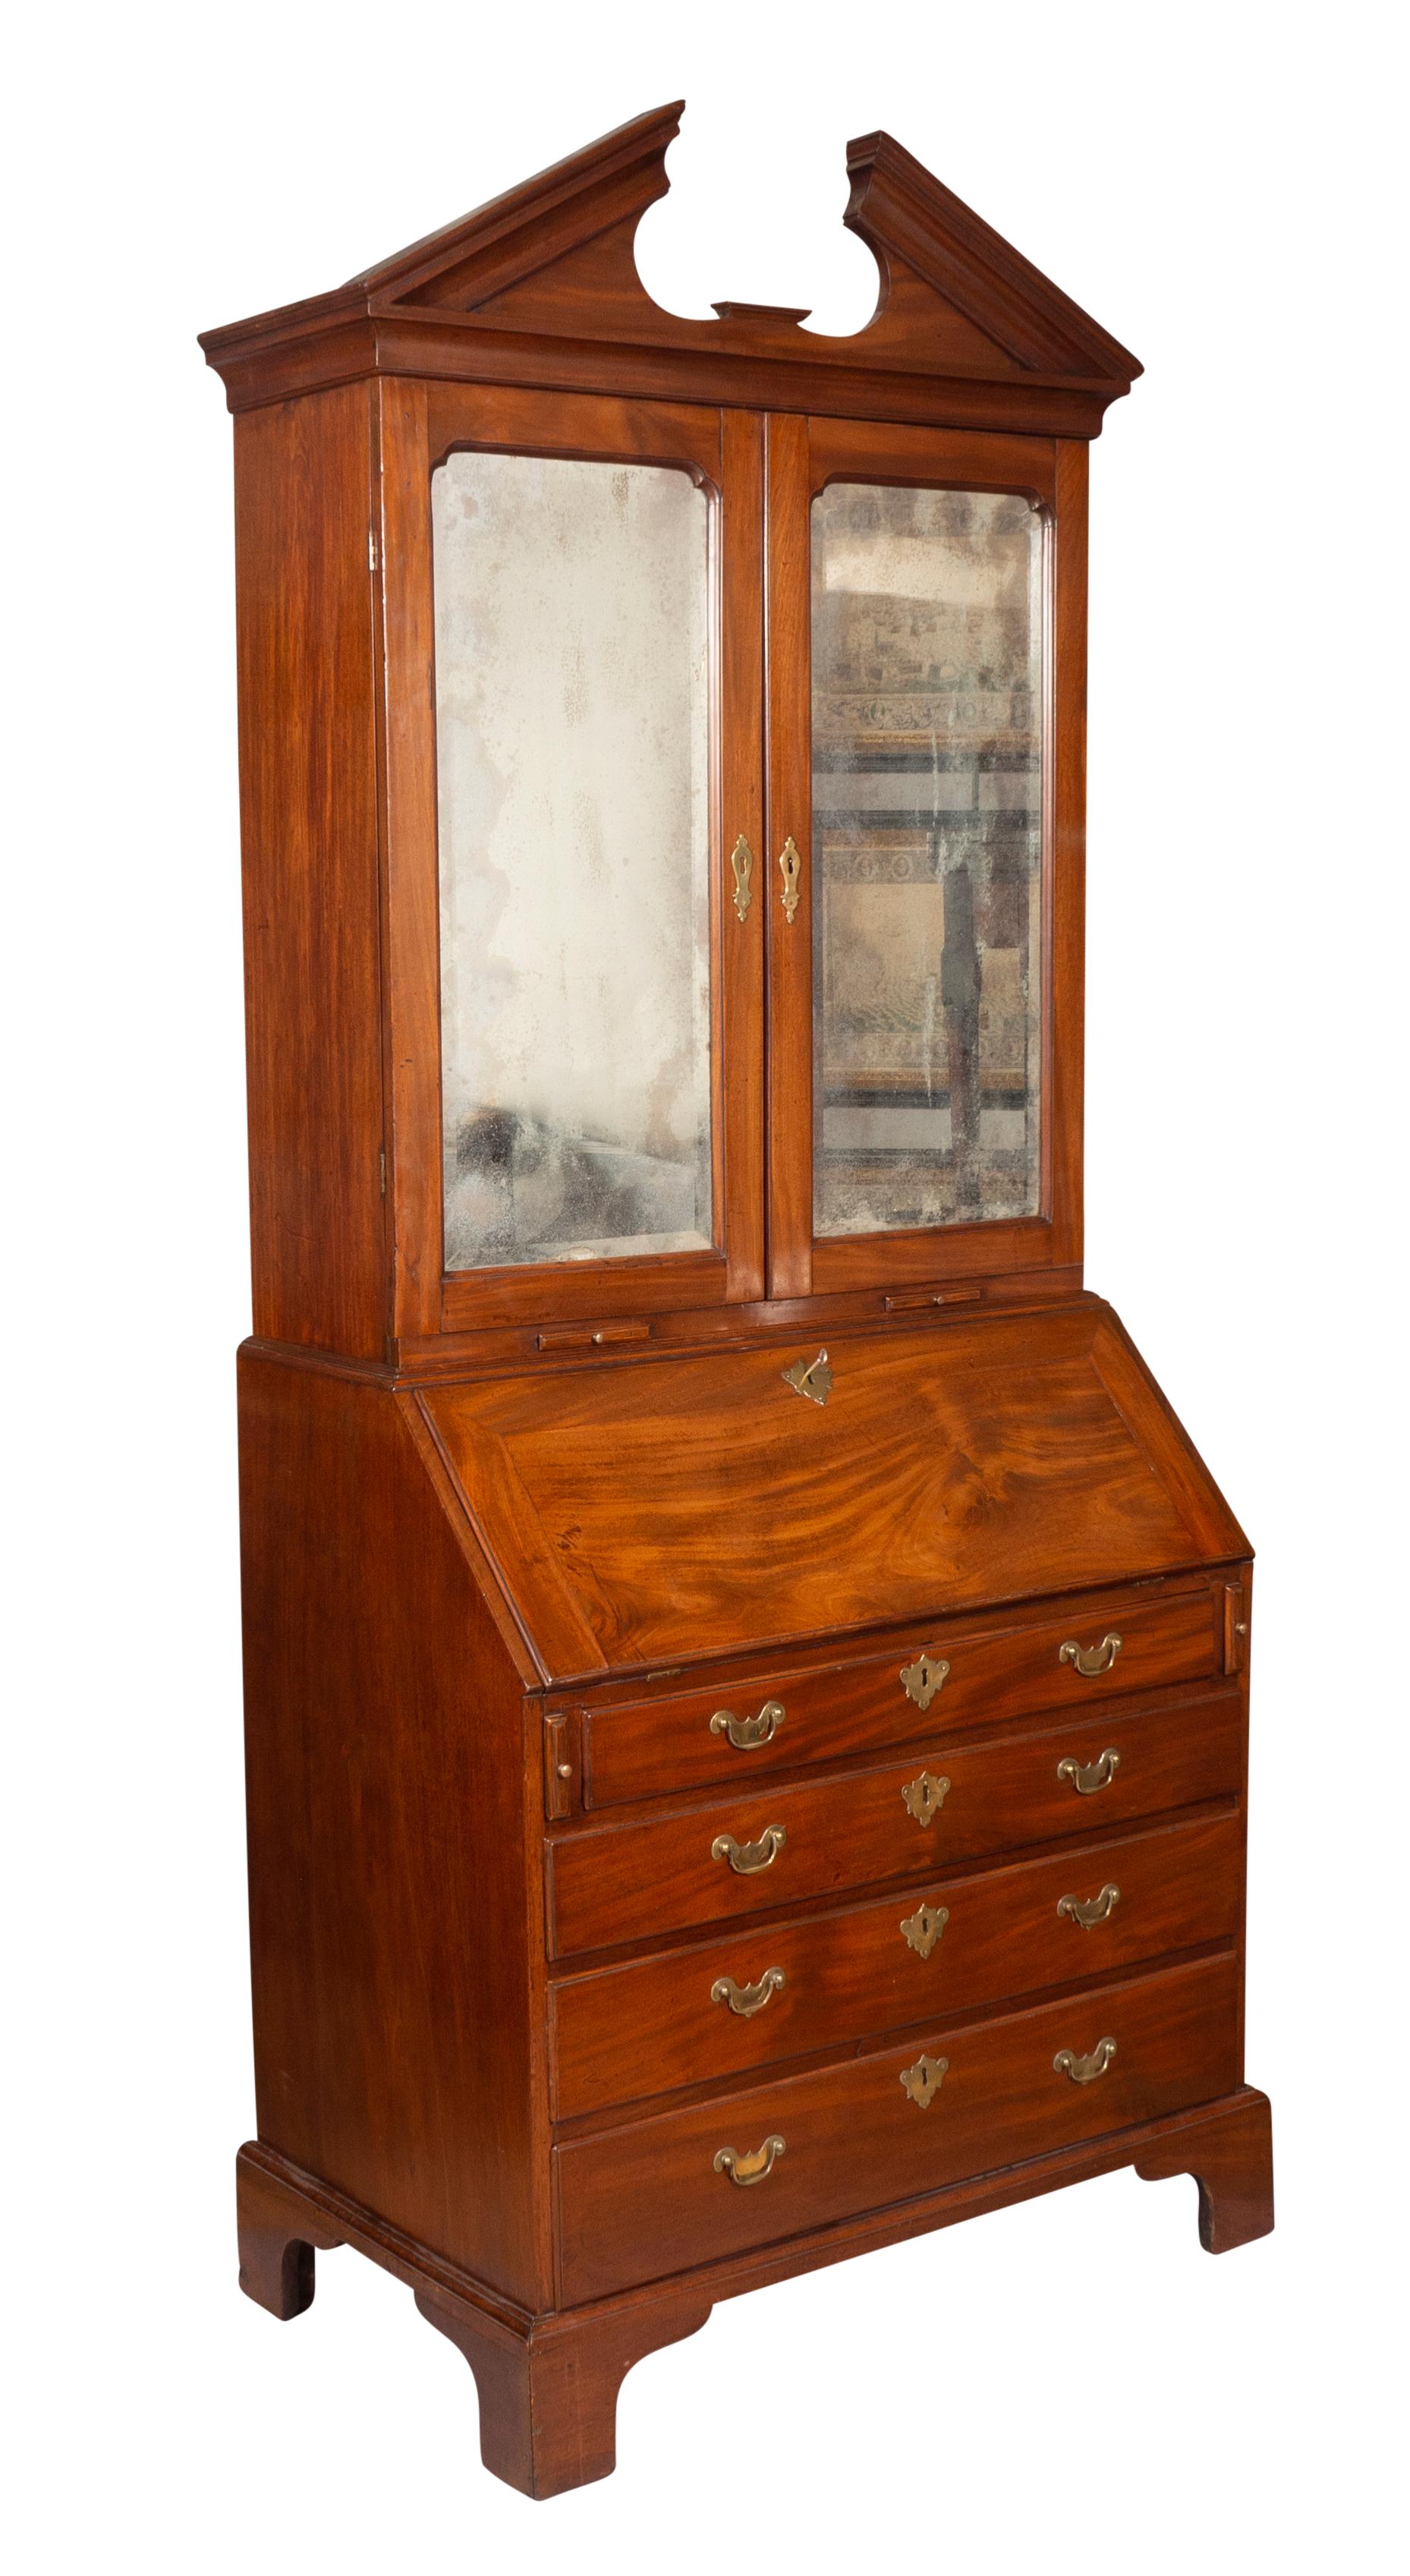 George III Mahogany Bureau Bookcase In Good Condition For Sale In Essex, MA